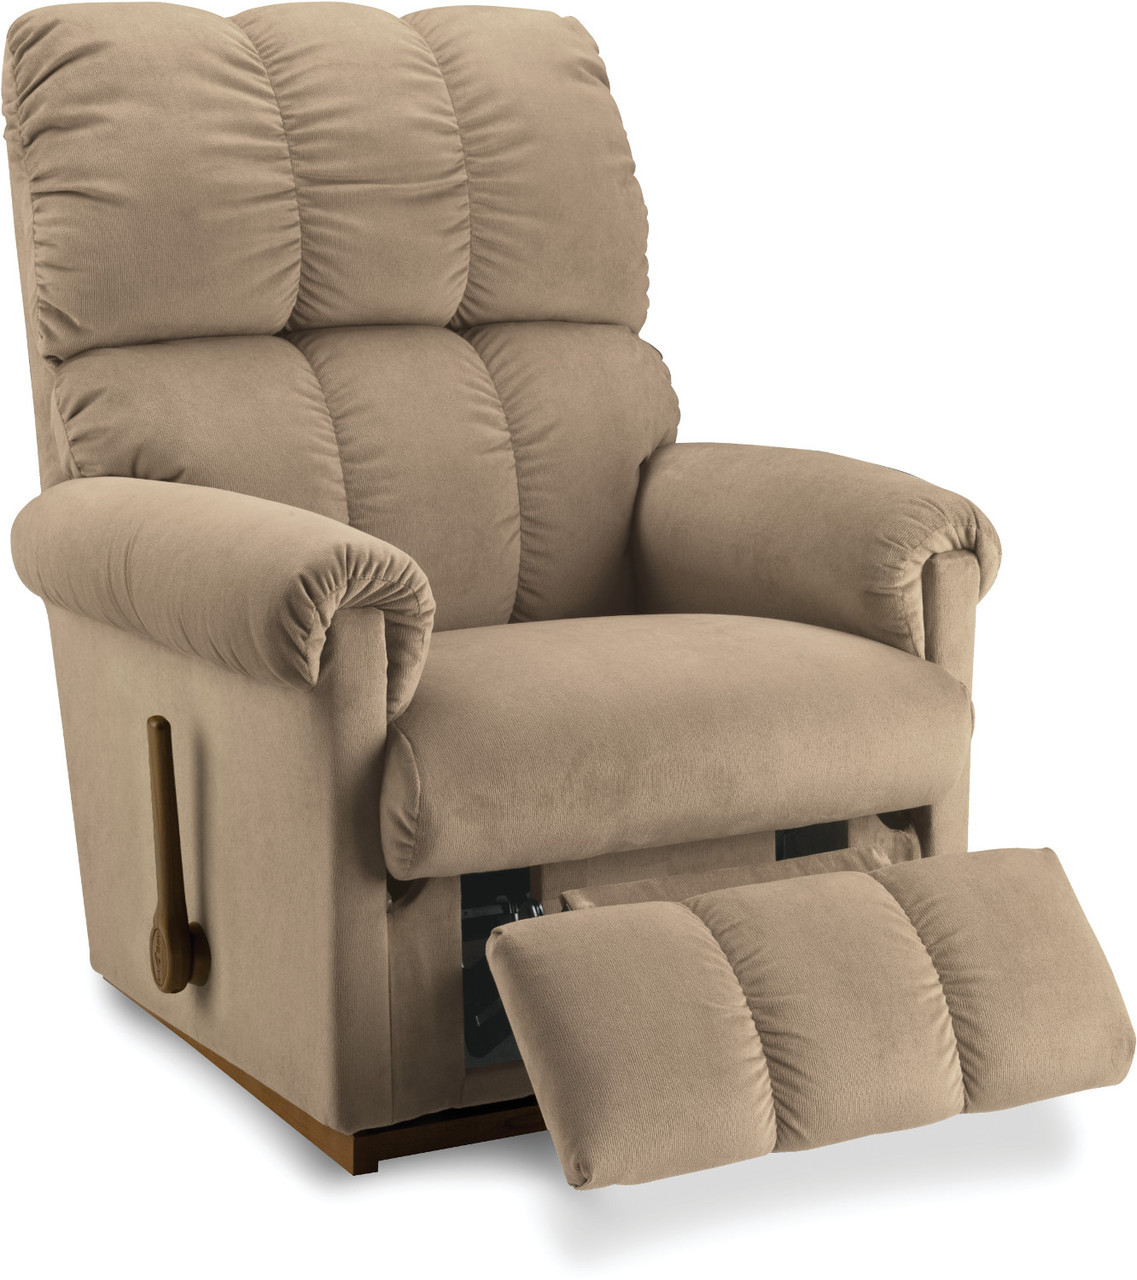 The Vail Reclina Way Recliner Sold At Rose Brothers Furniture